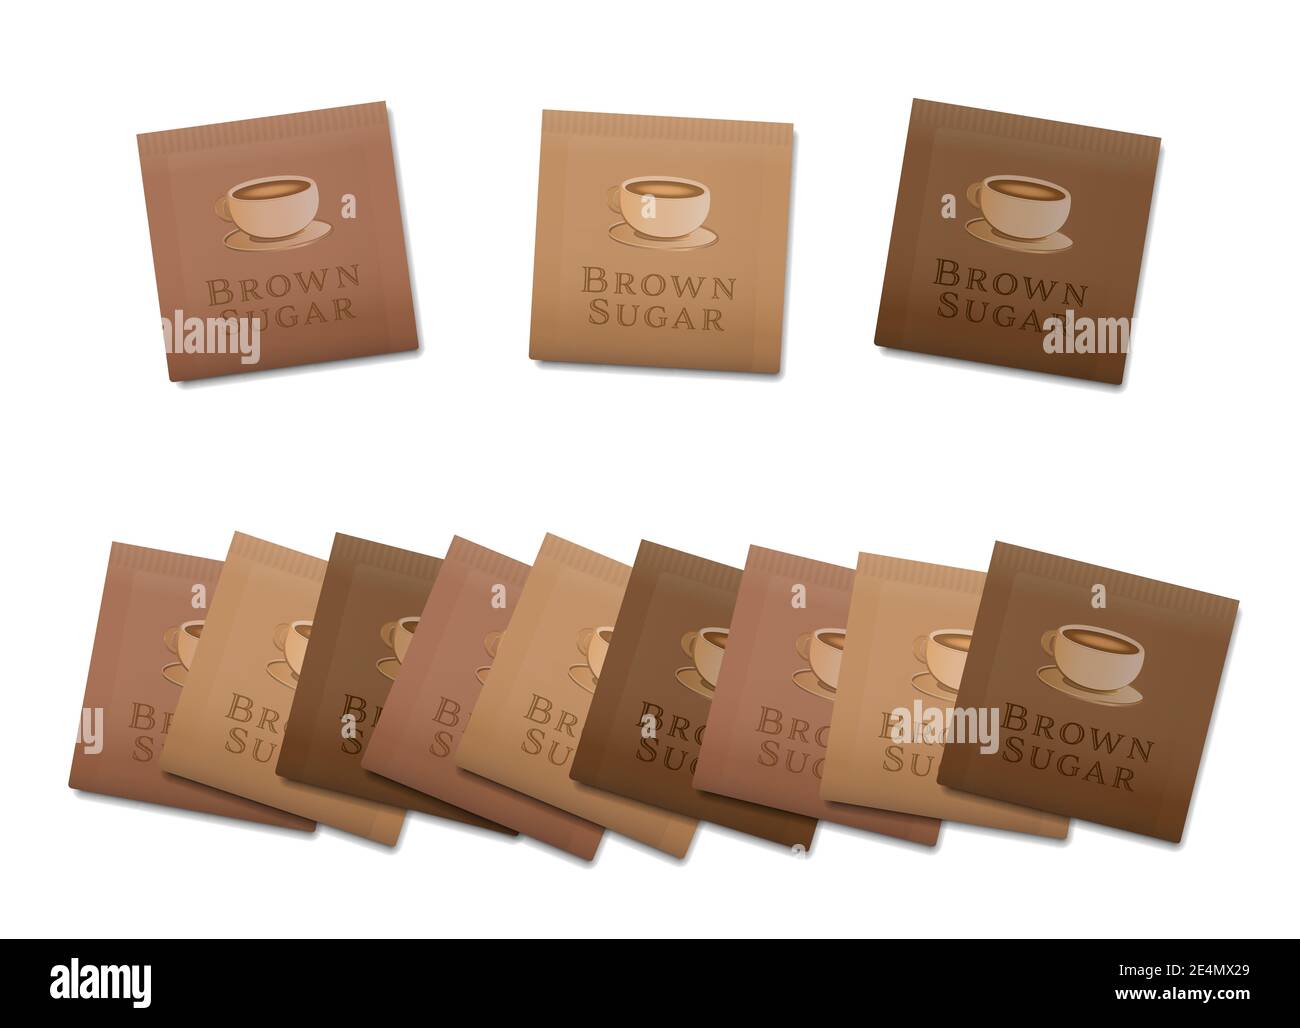 Brown sugar sachets, fake product paper packets - illustration on white background. Stock Photo